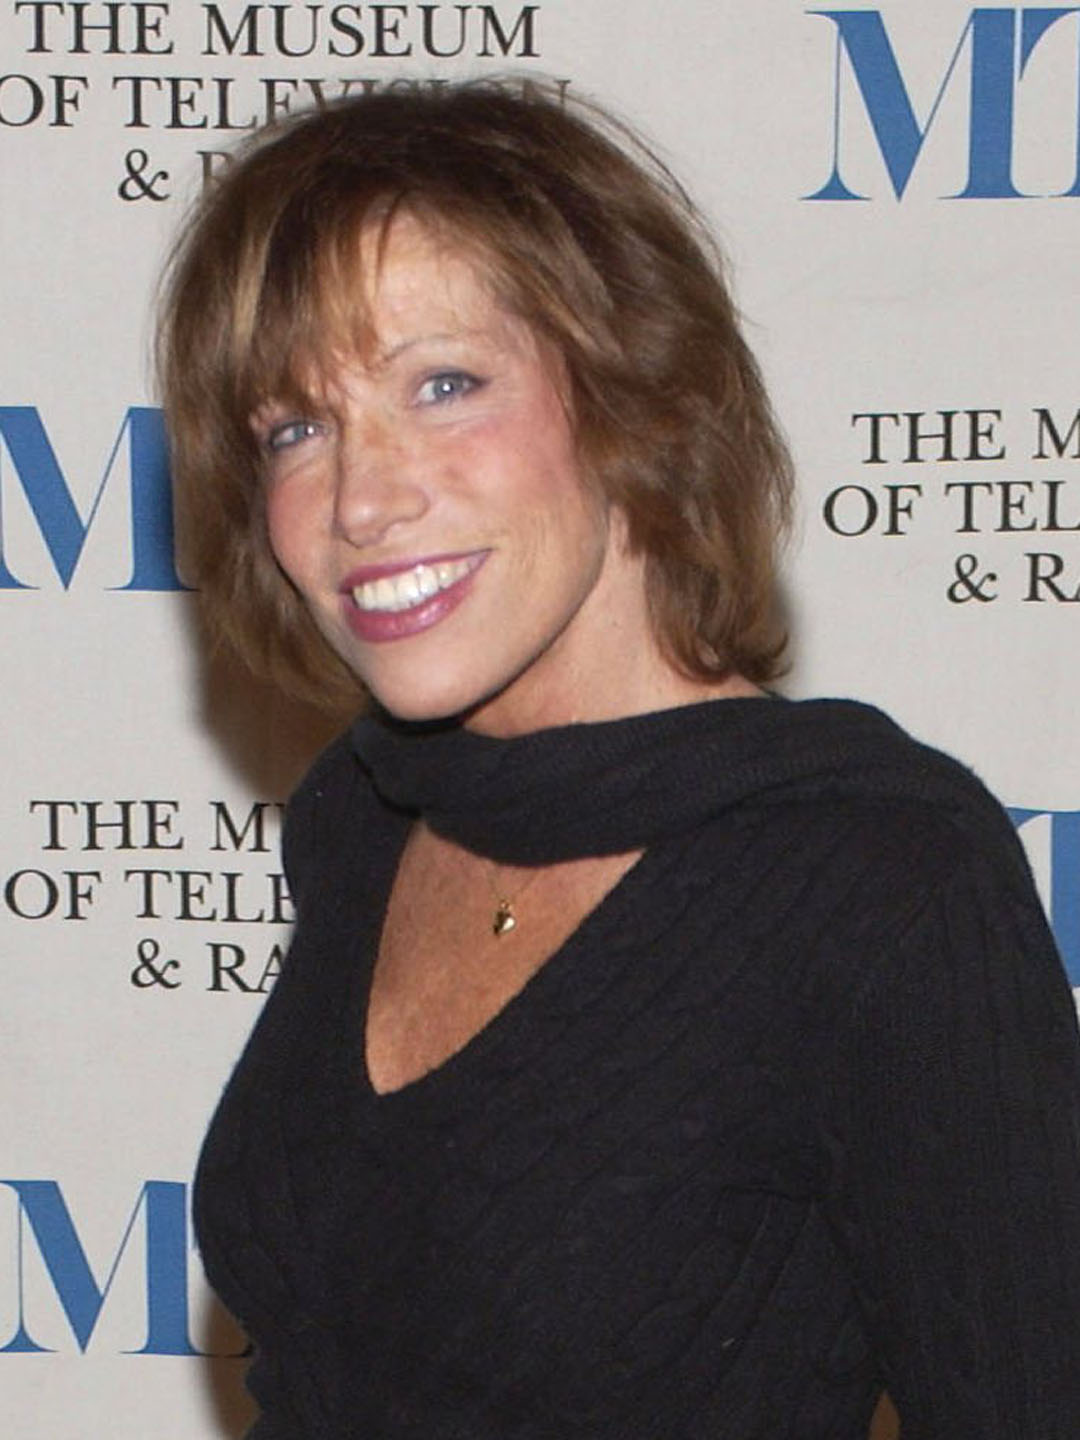 How tall is Carly Simon?